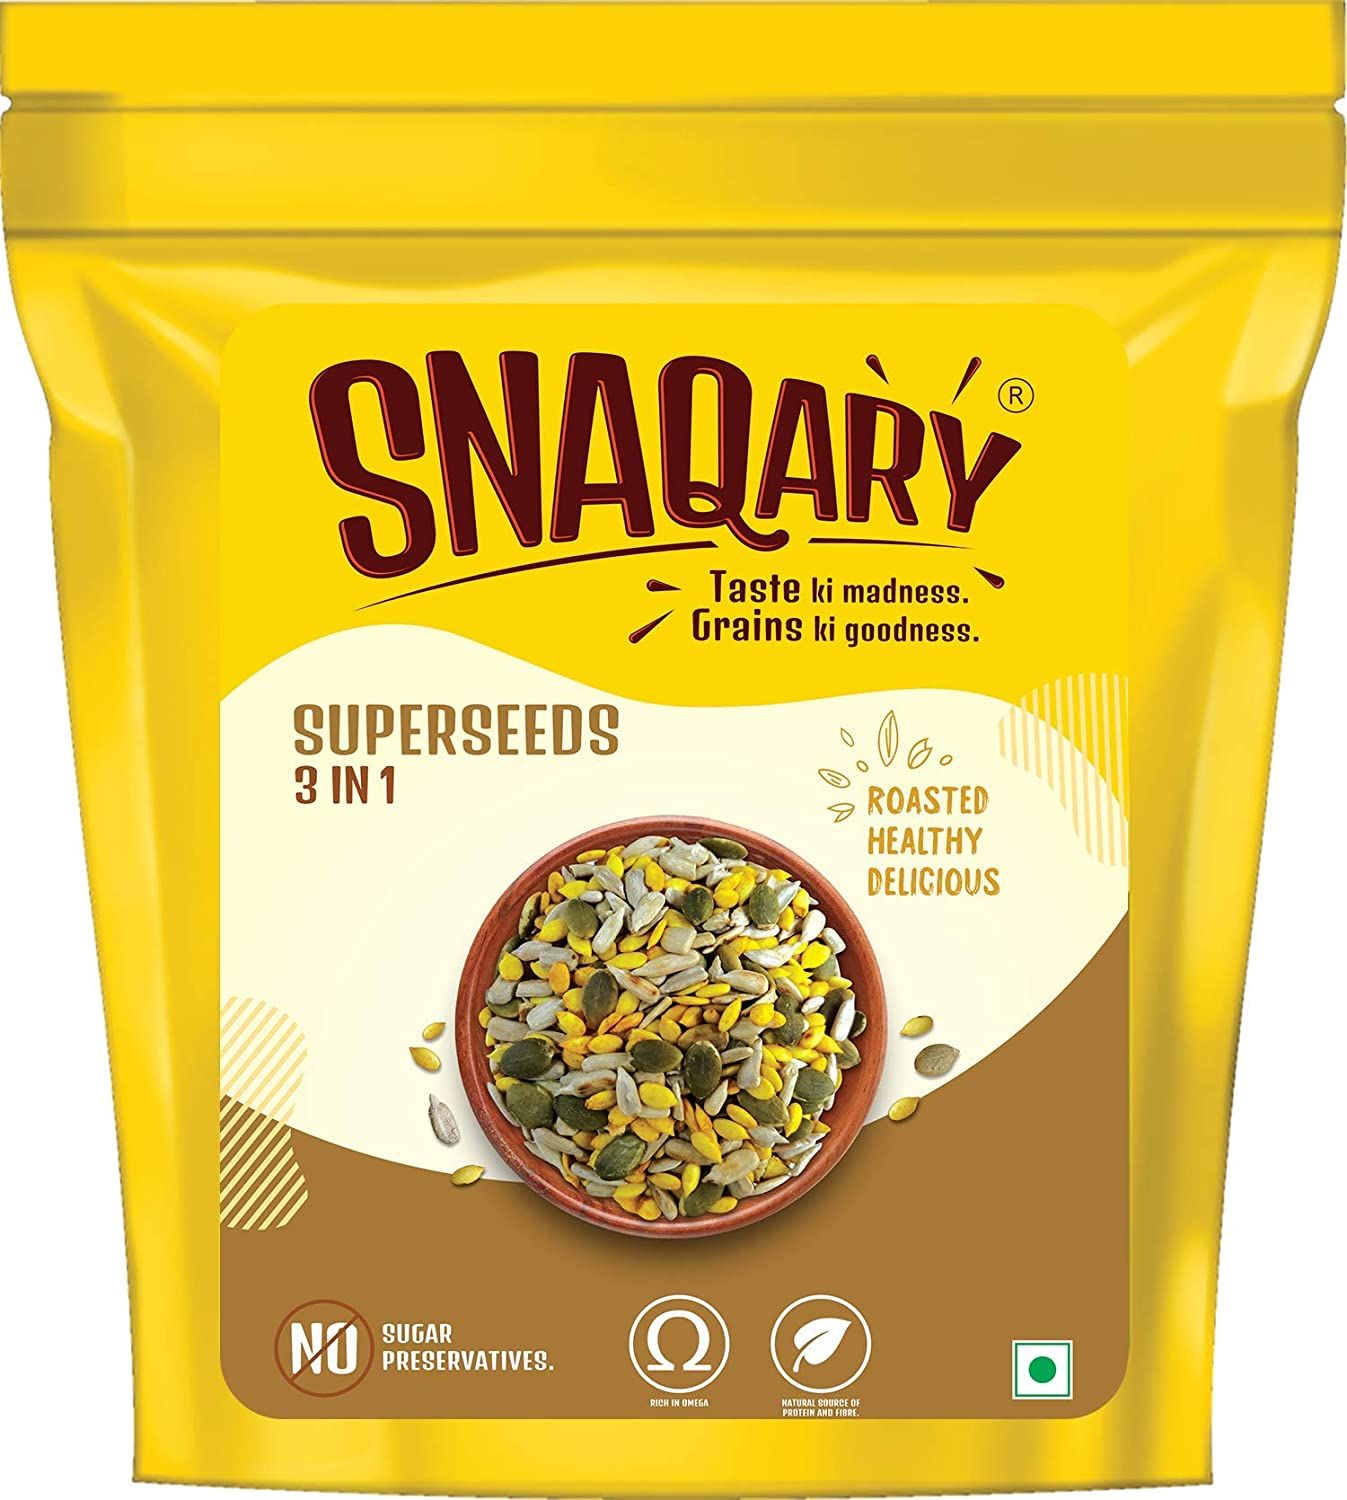 Snaqary Super Seeds 3 in 1 Image